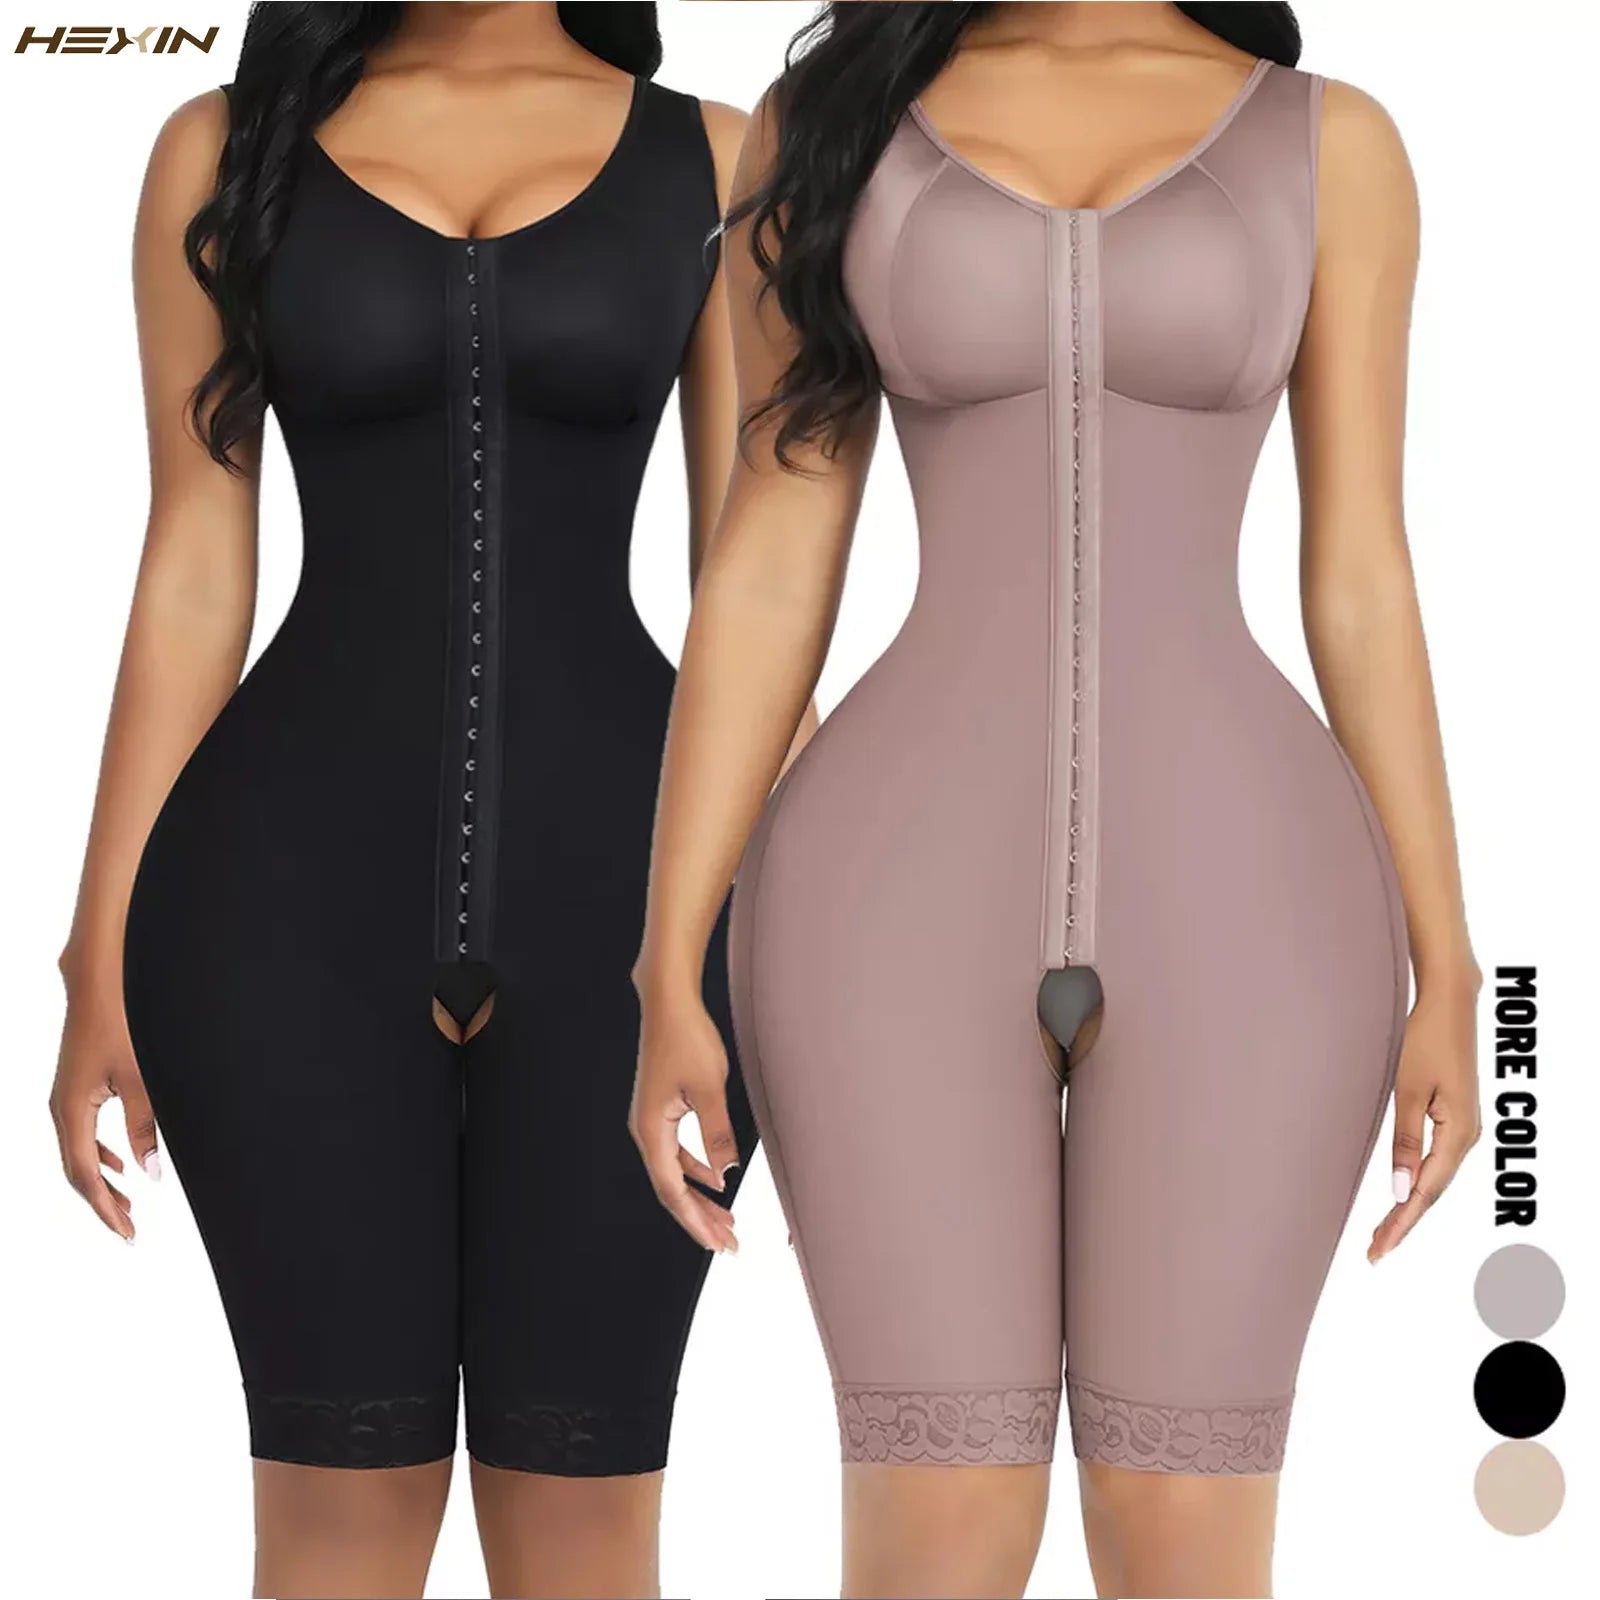 Colombianas Fajas Powernet Girdle Verox Three Hooks at Front Bra in Lycralong Thigh Slimming Woman Reducing Girdles Colombian